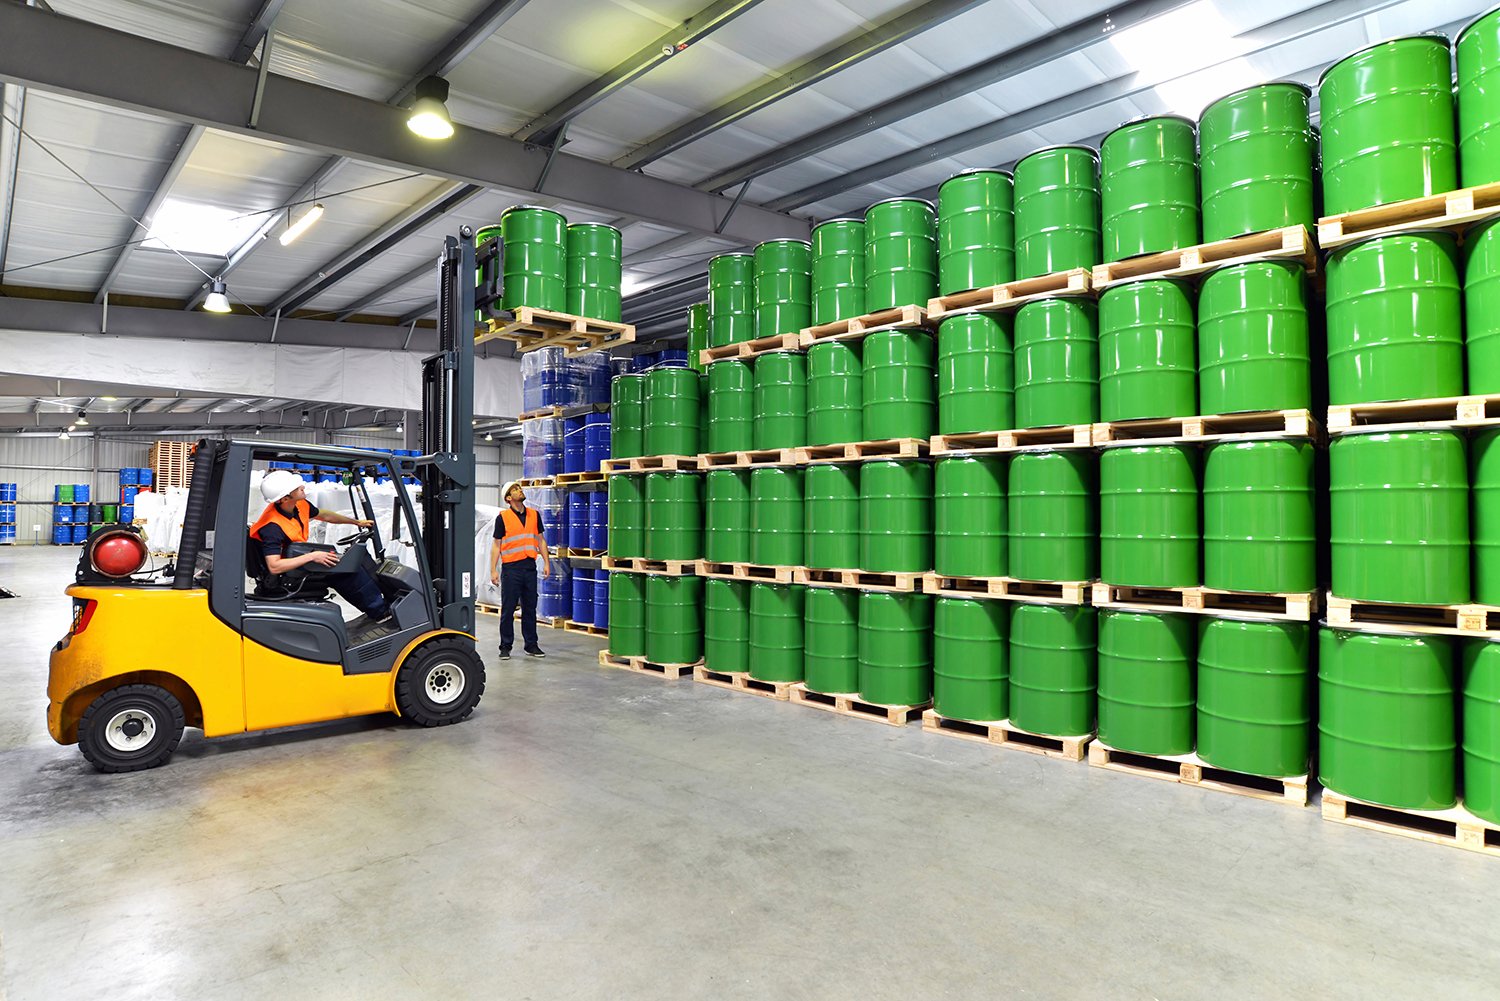 Green barrels filled with sustainable products line the walls of a distribution facility